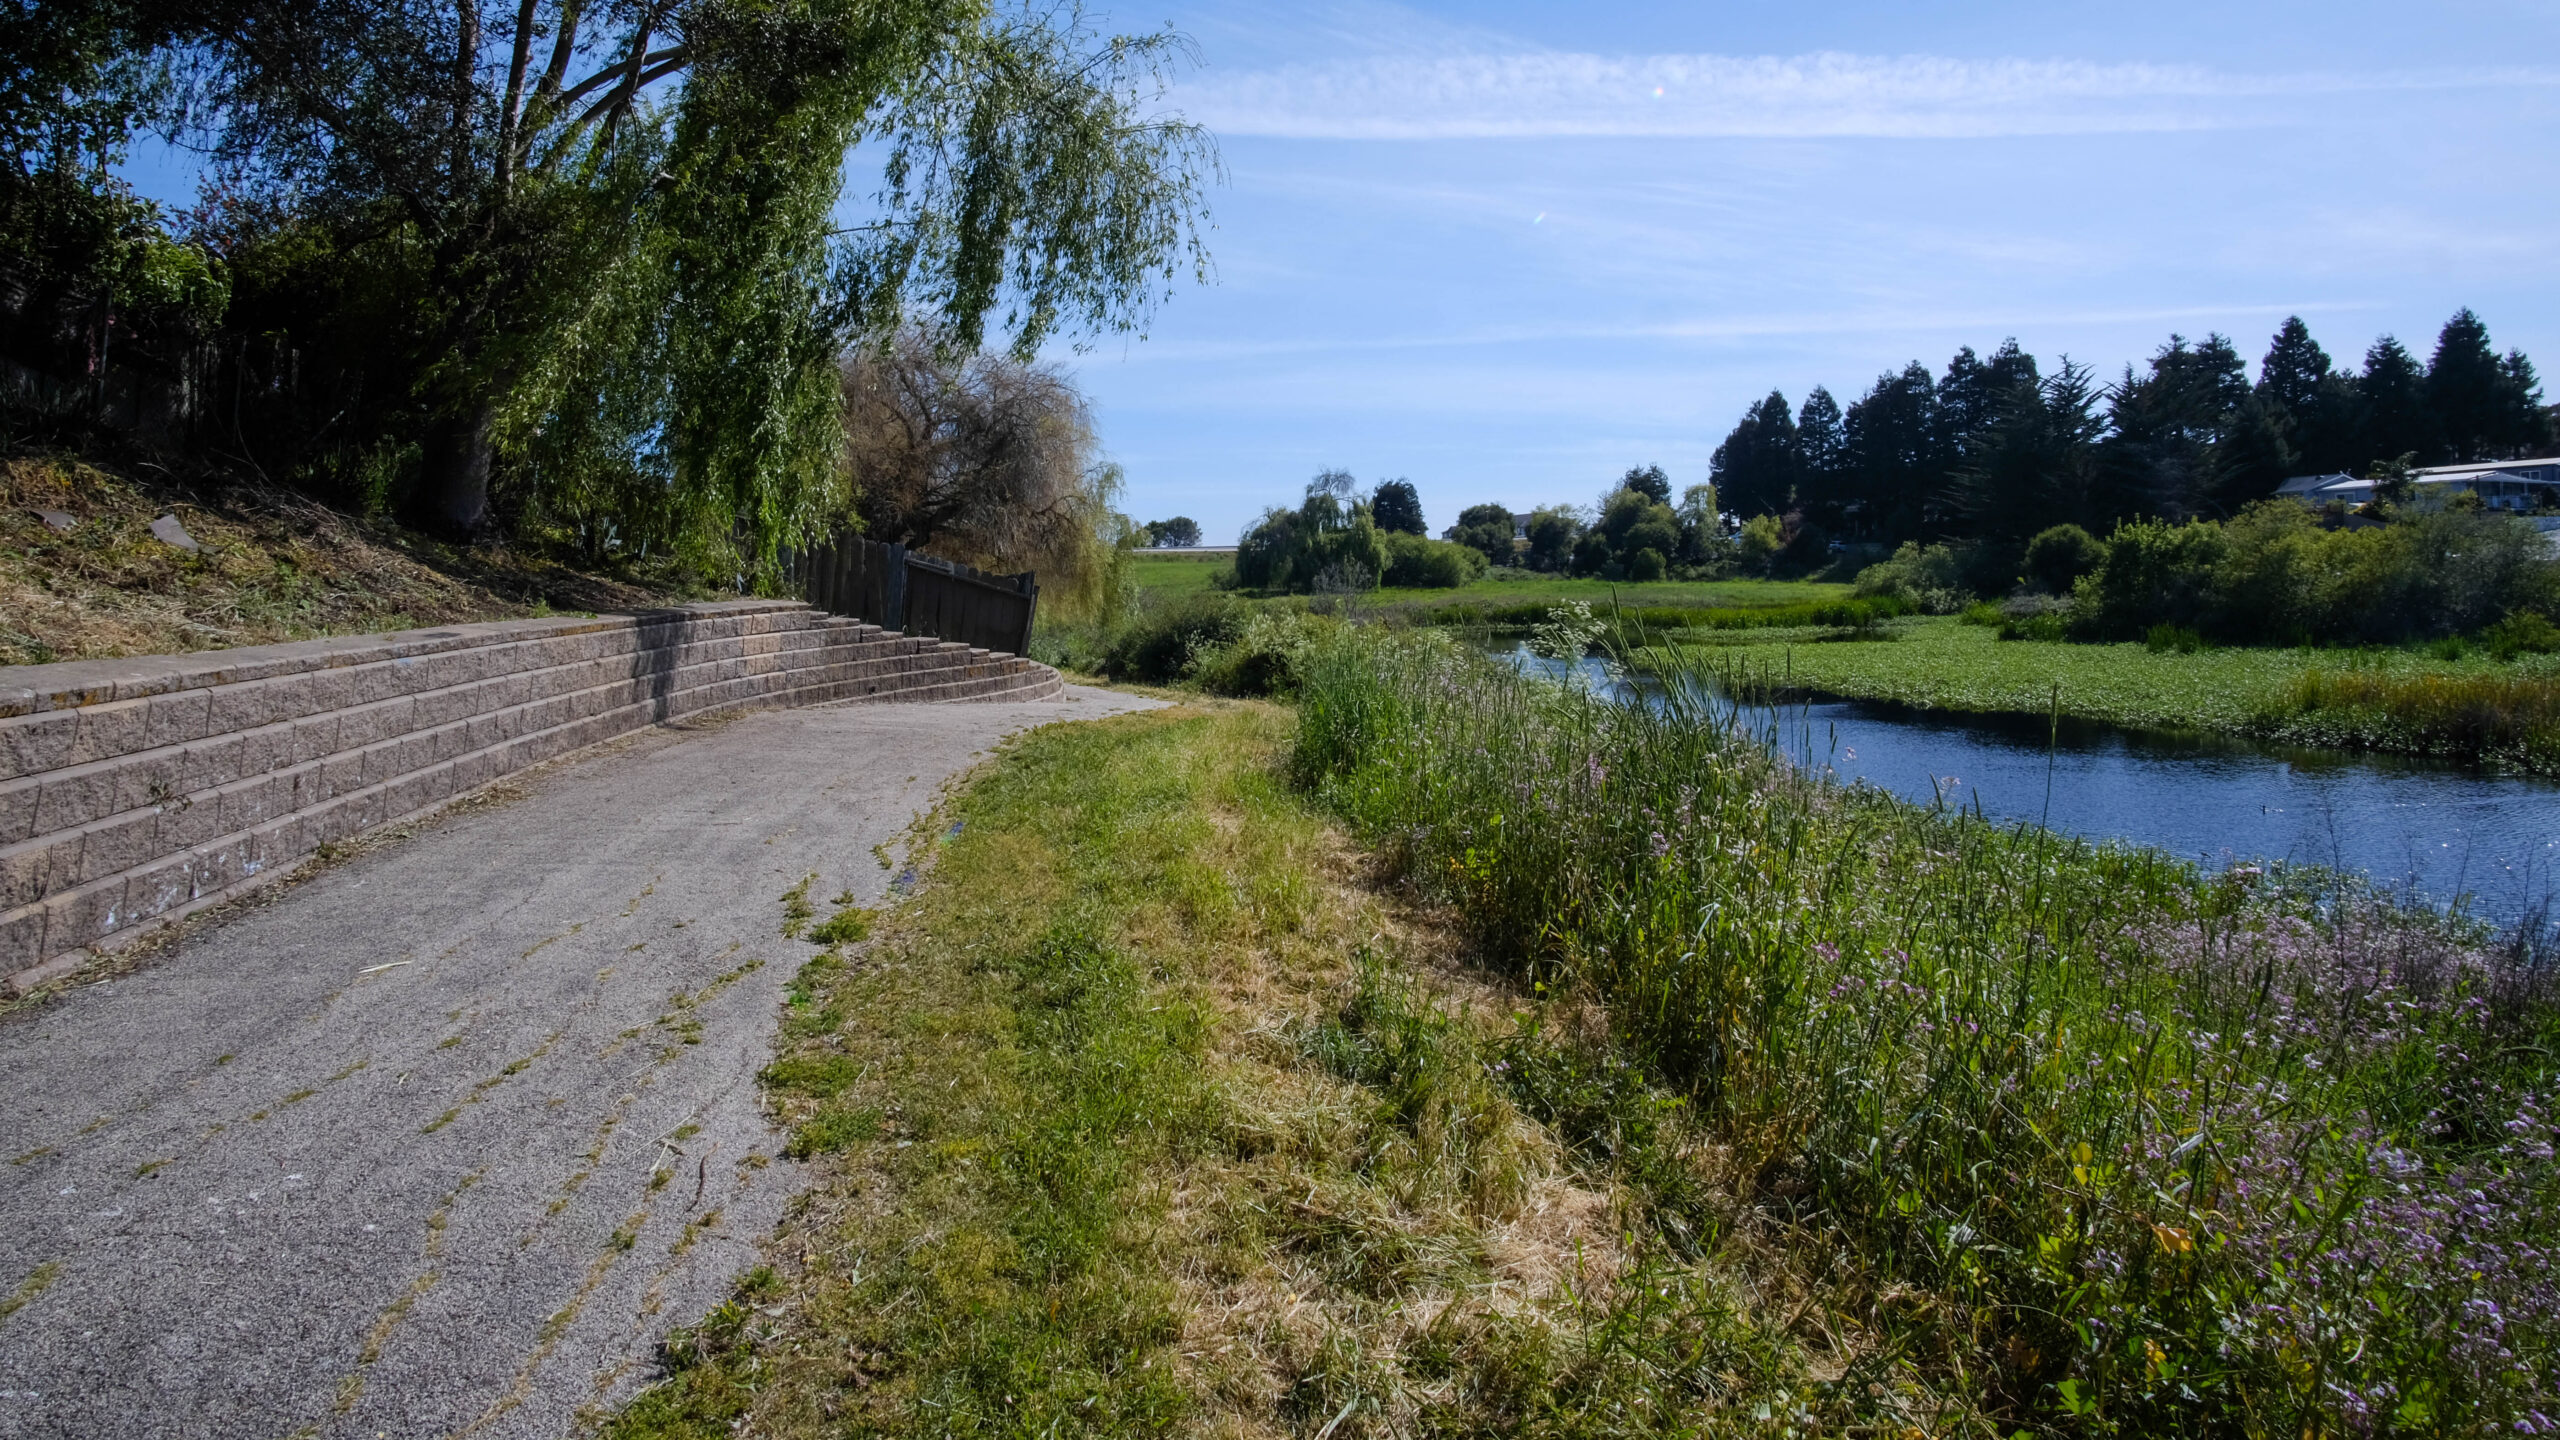 A paved trail runs along a short stone wall on its left and a grassy hill descends into the reeds and water of Struve Slough on the trail's right.